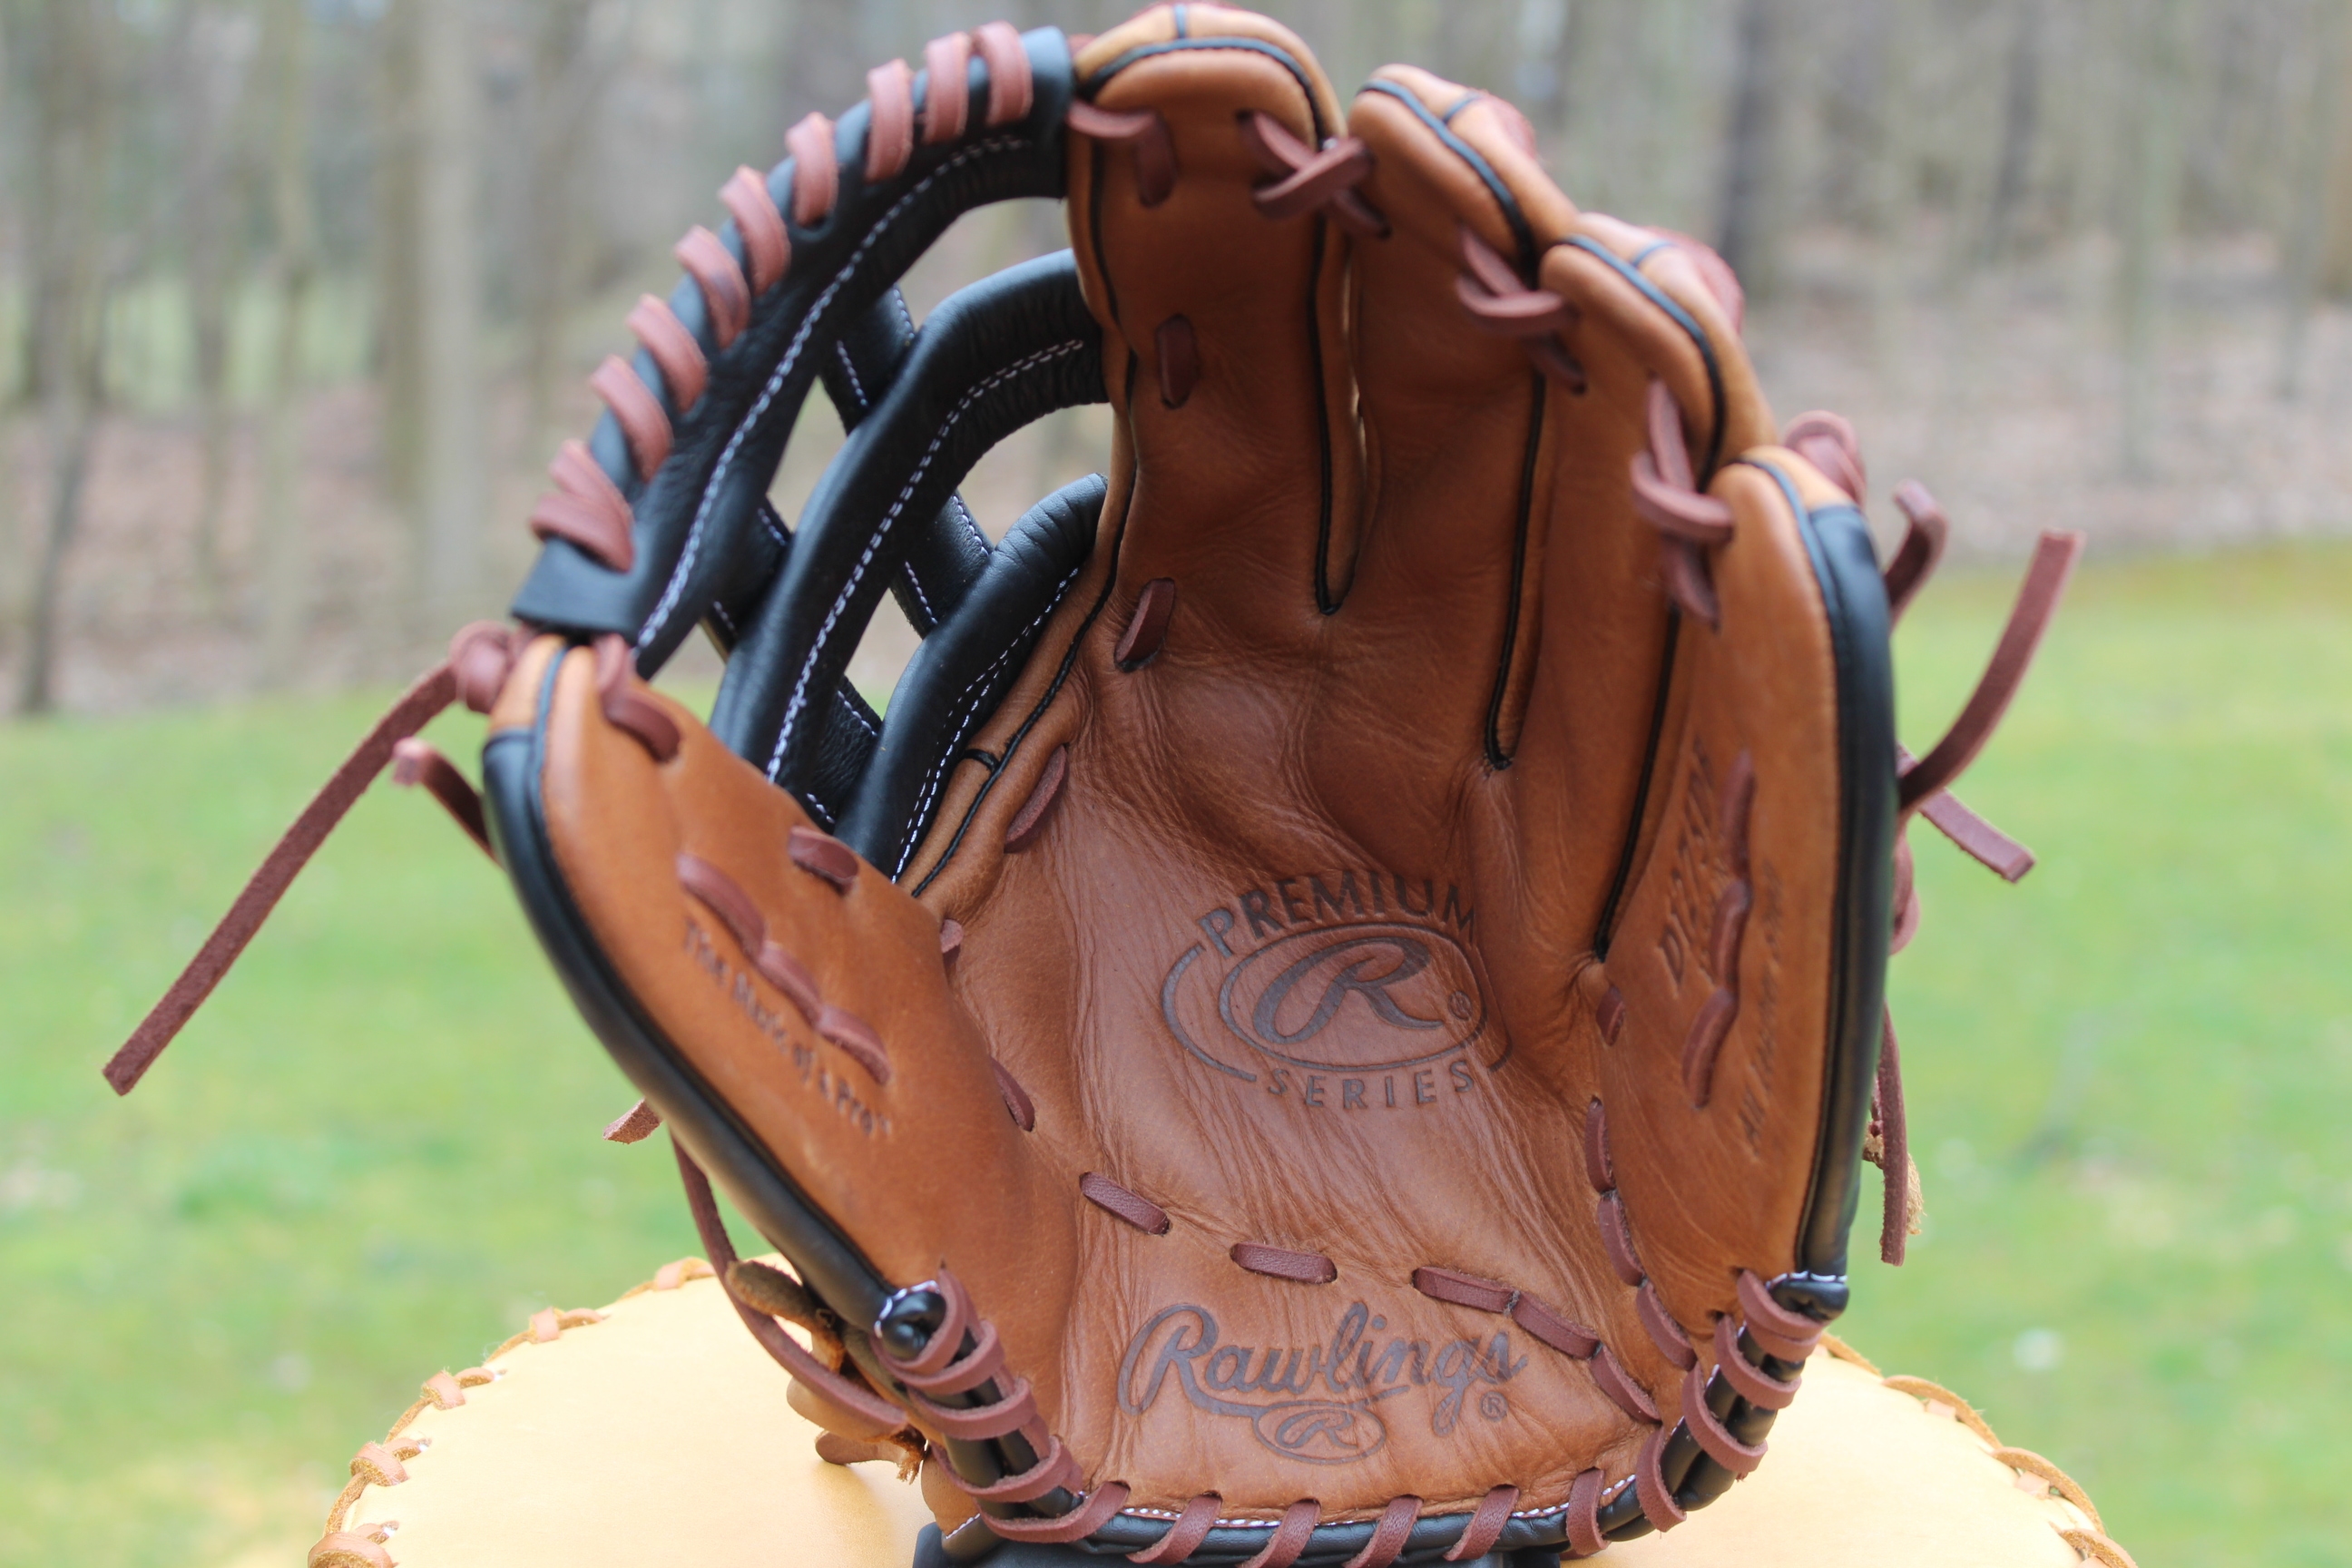 Used Rawlings Outfield Right Hand Throw Premium Series Baseball Glove 12.75"